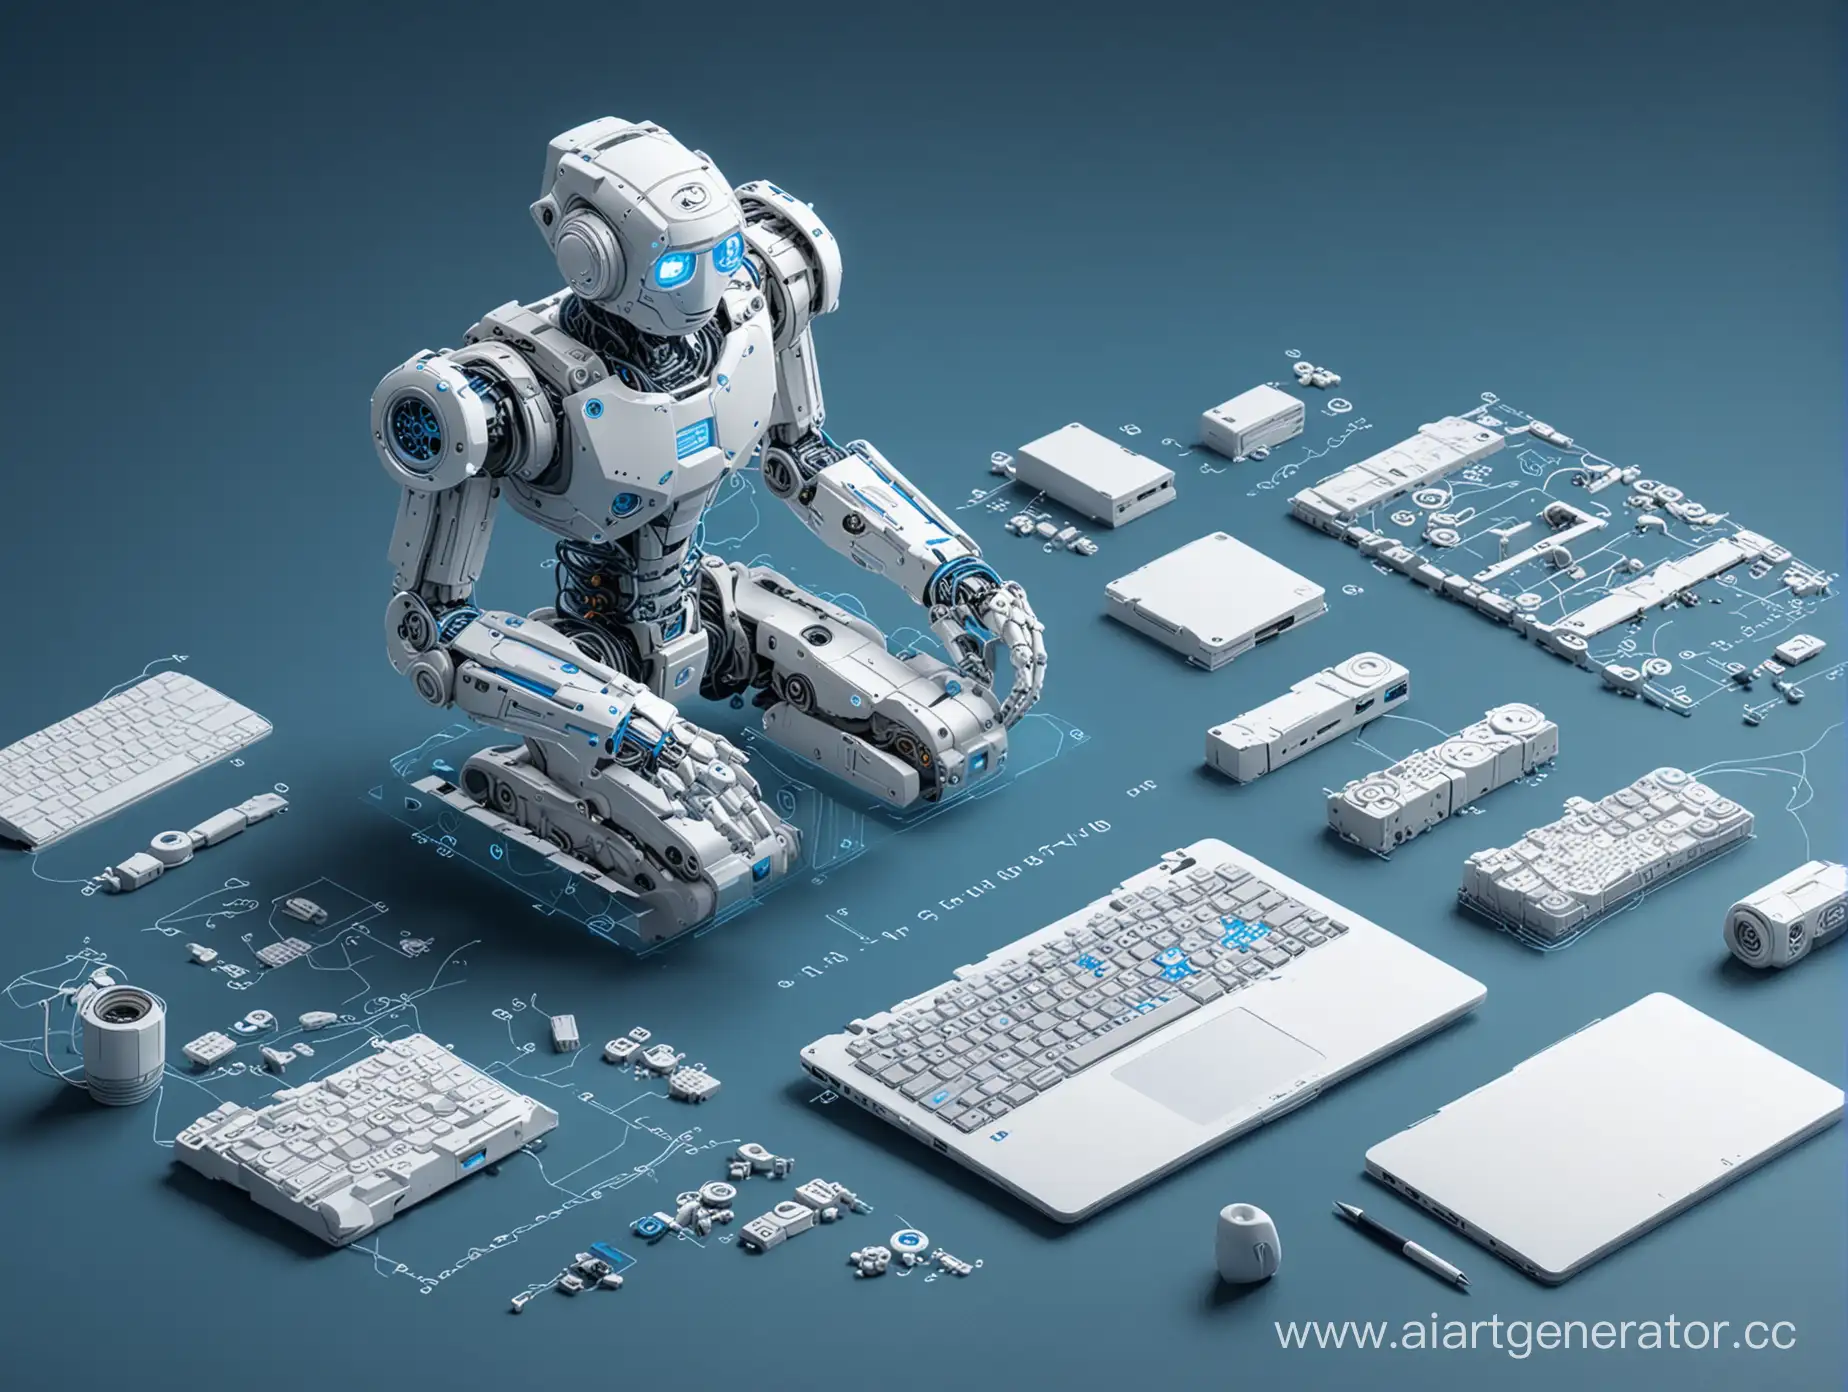 Computer-School-Course-White-Laptop-and-Robot-Tech-Details-on-Blue-Background